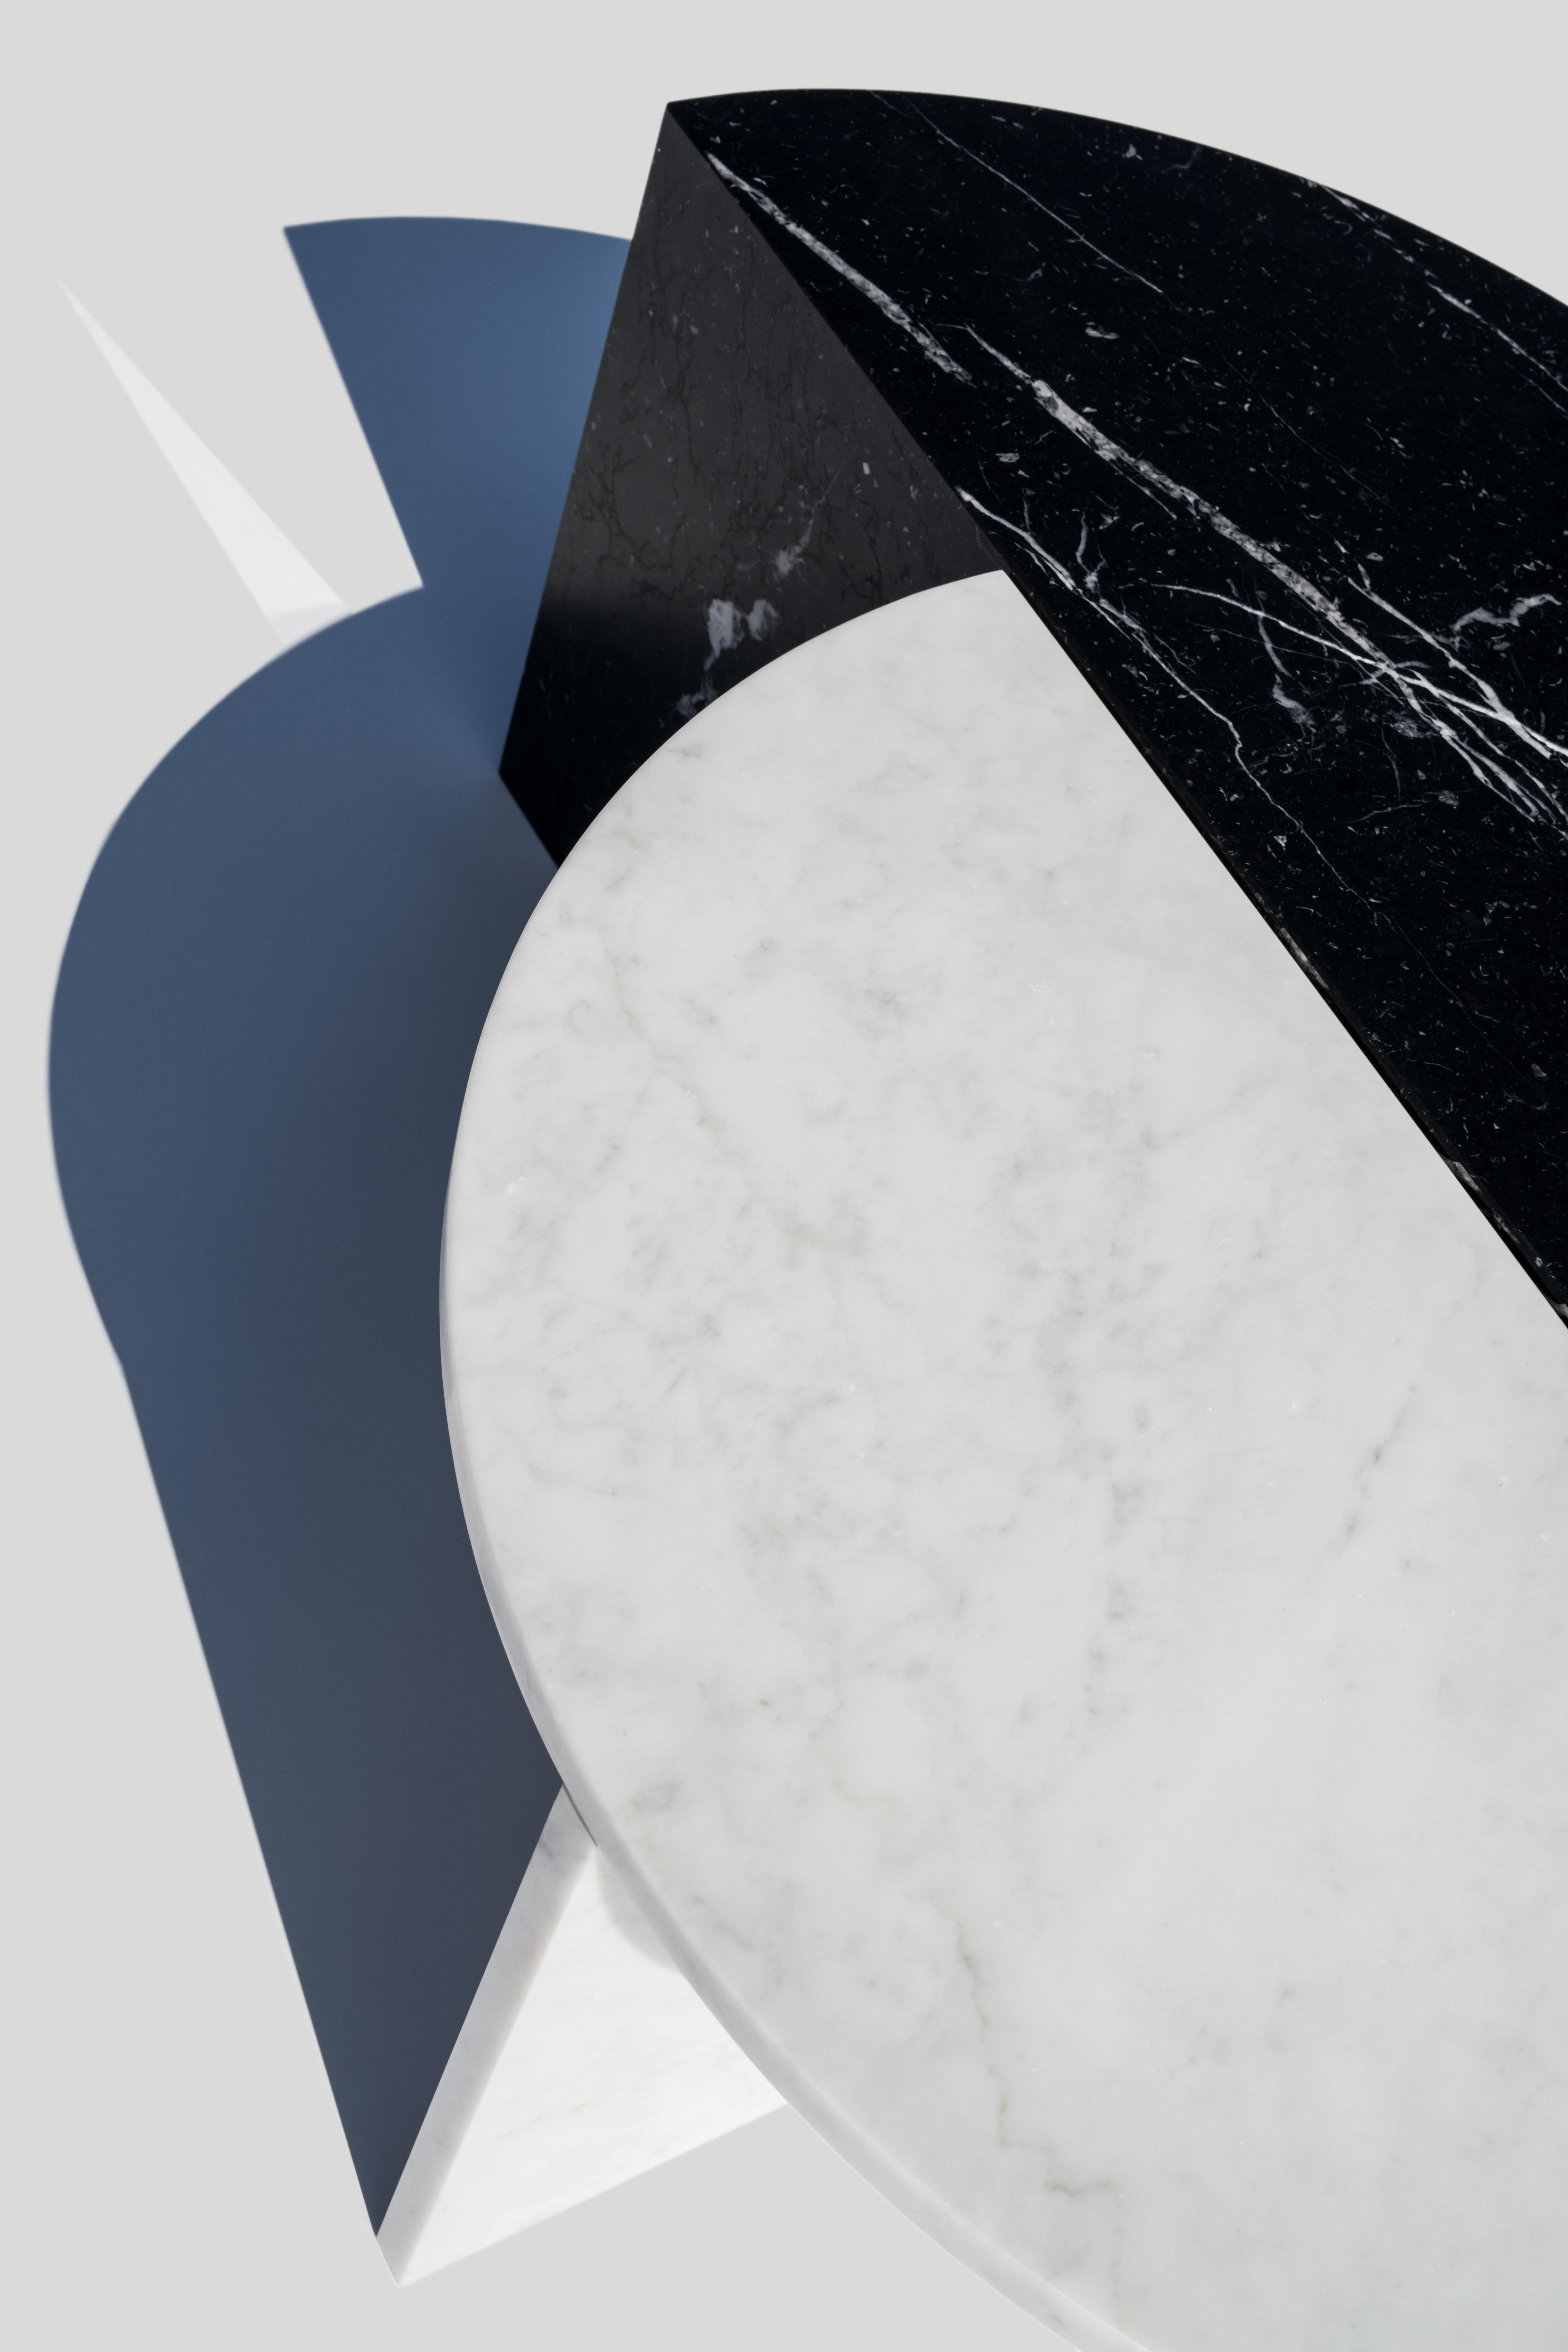 Materials: Marble;
Marble: Nero Marquina (black); Carrara (white)
Dimensions: 70 x 35 x 35
Designer: Sebastian Scherer

These coffee tables can be combined in a variety of ways creating an interesting mix of form and material. The tables are